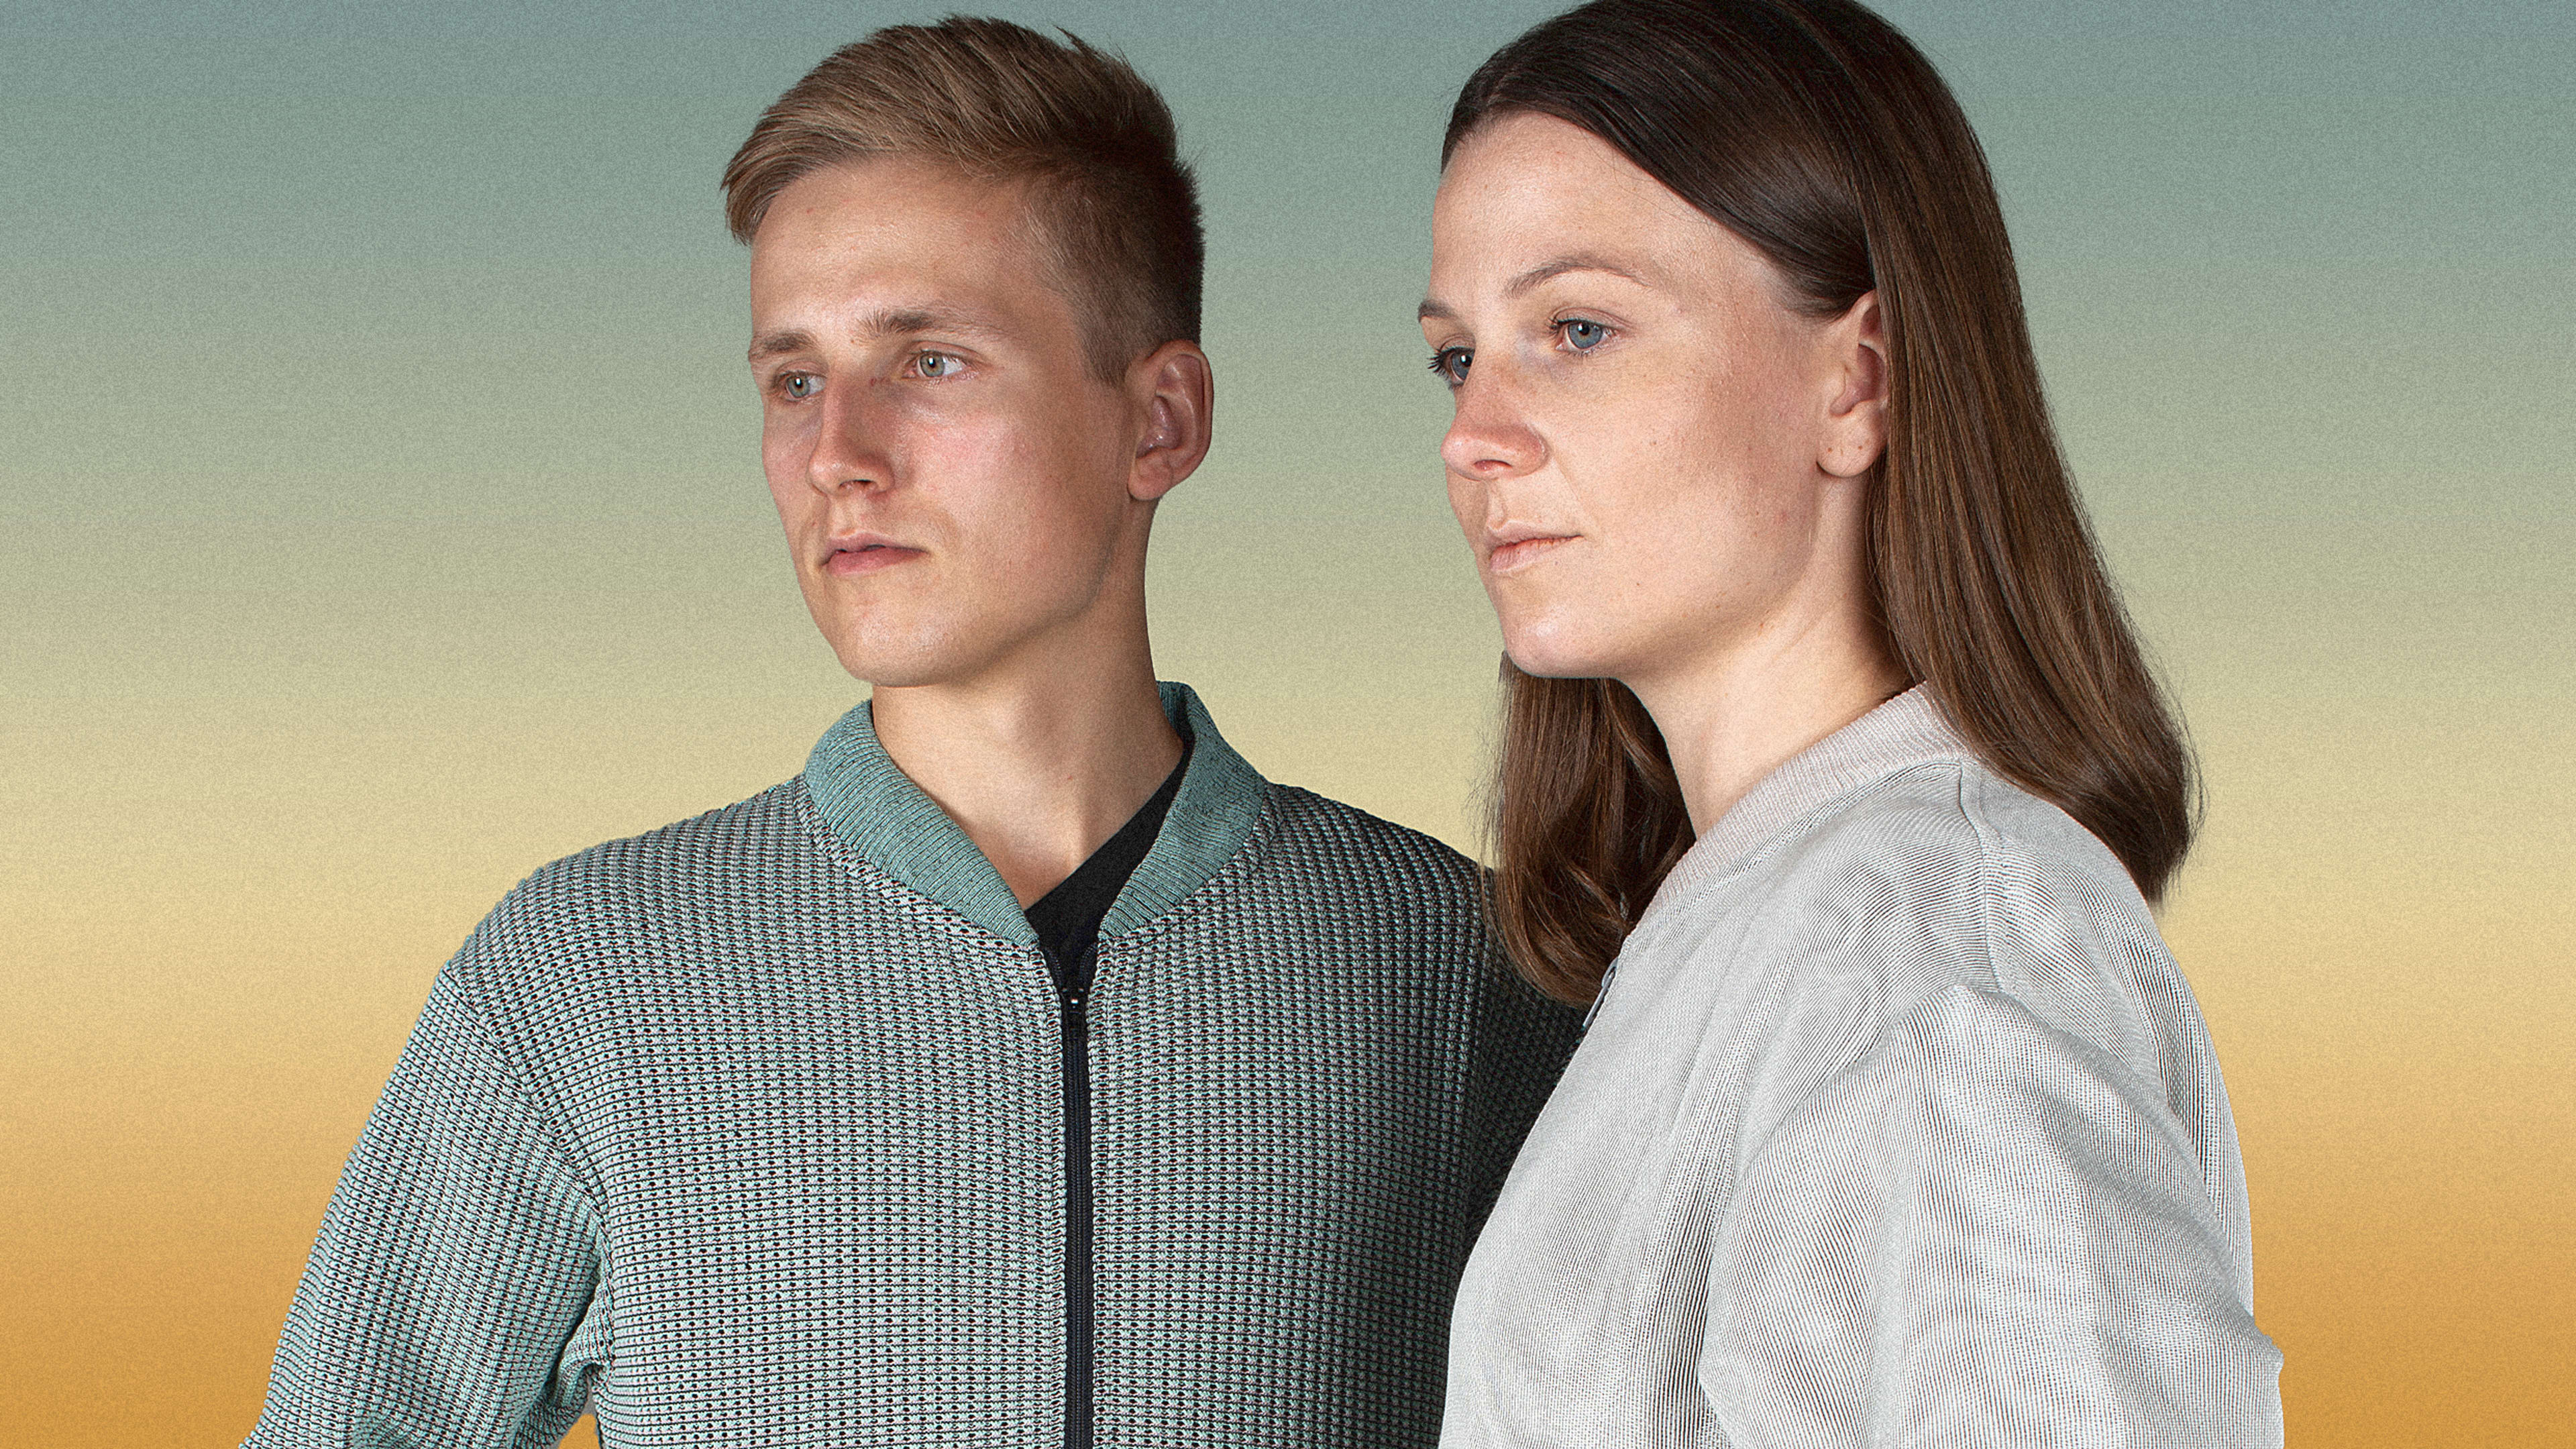 These sleek clothes can invisibly power your phone